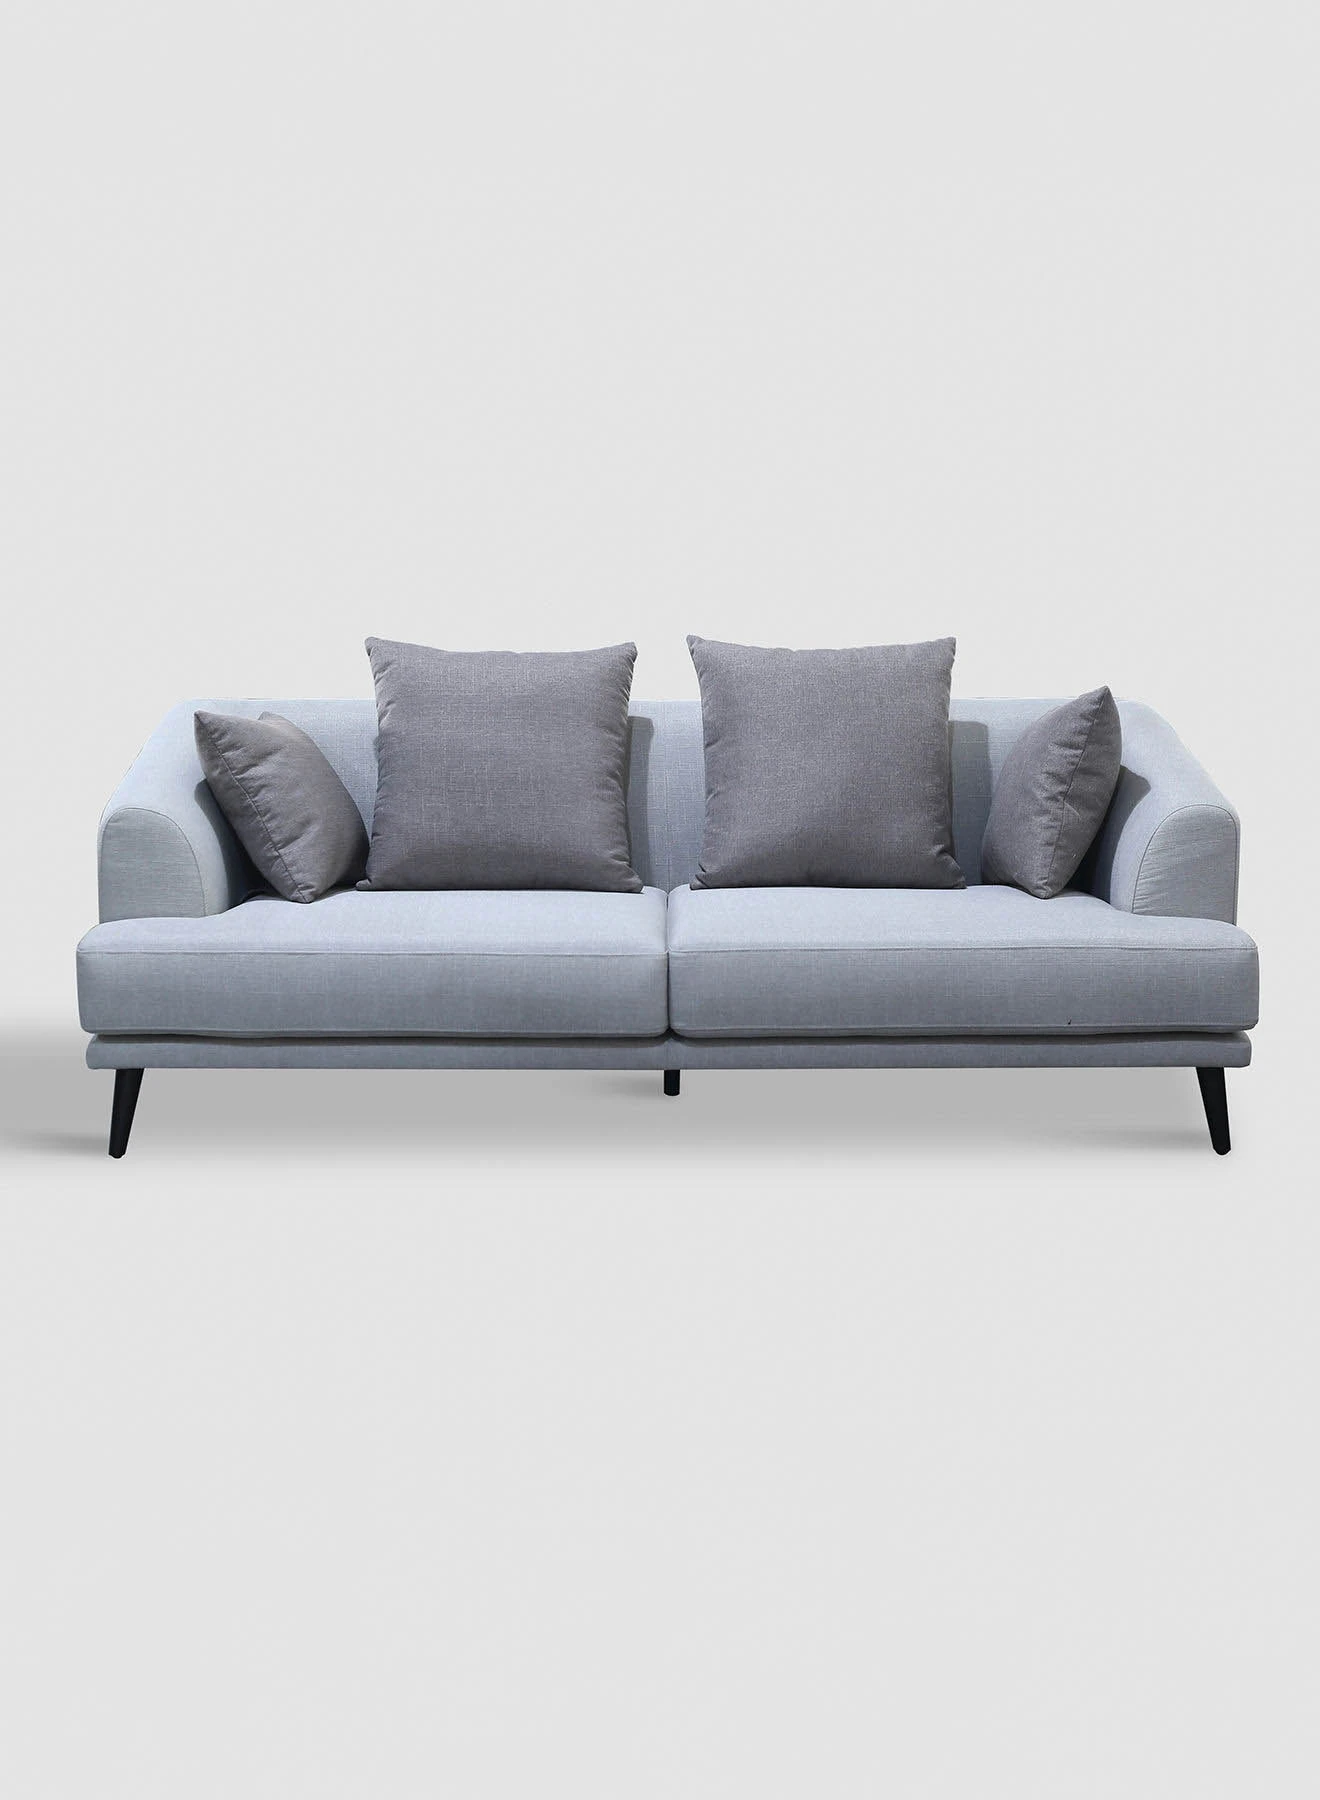 ebb & flow Sofa Luxurious - Upholstered Fabric Grey Wood Couch - 2010 X 860 X 730 - 3 Seater Sofa Relaxing Sofa